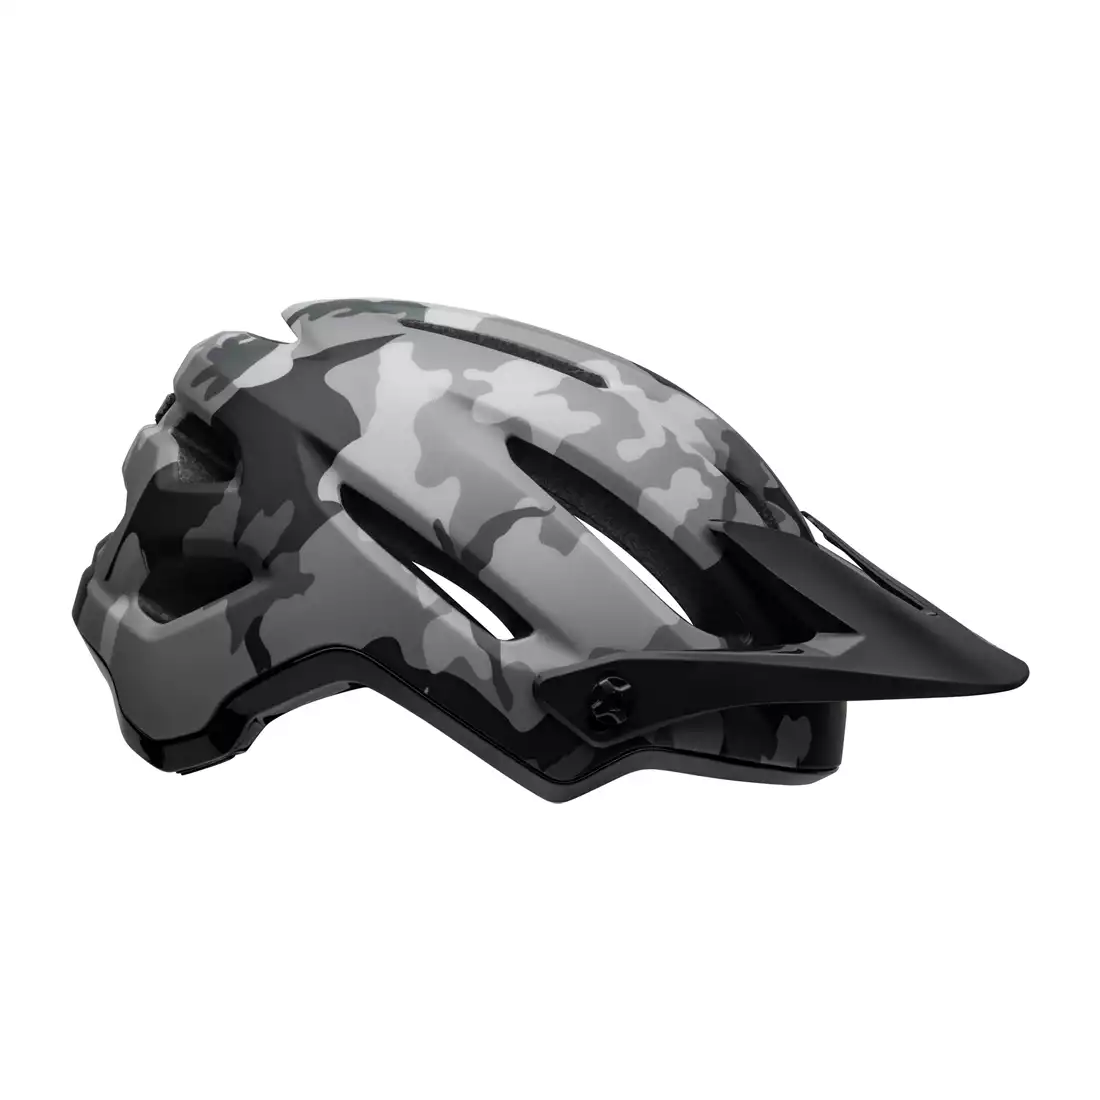 Kask rowerowy mtb BELL 4FORTY INTEGRATED MIPS matte gloss black camo 